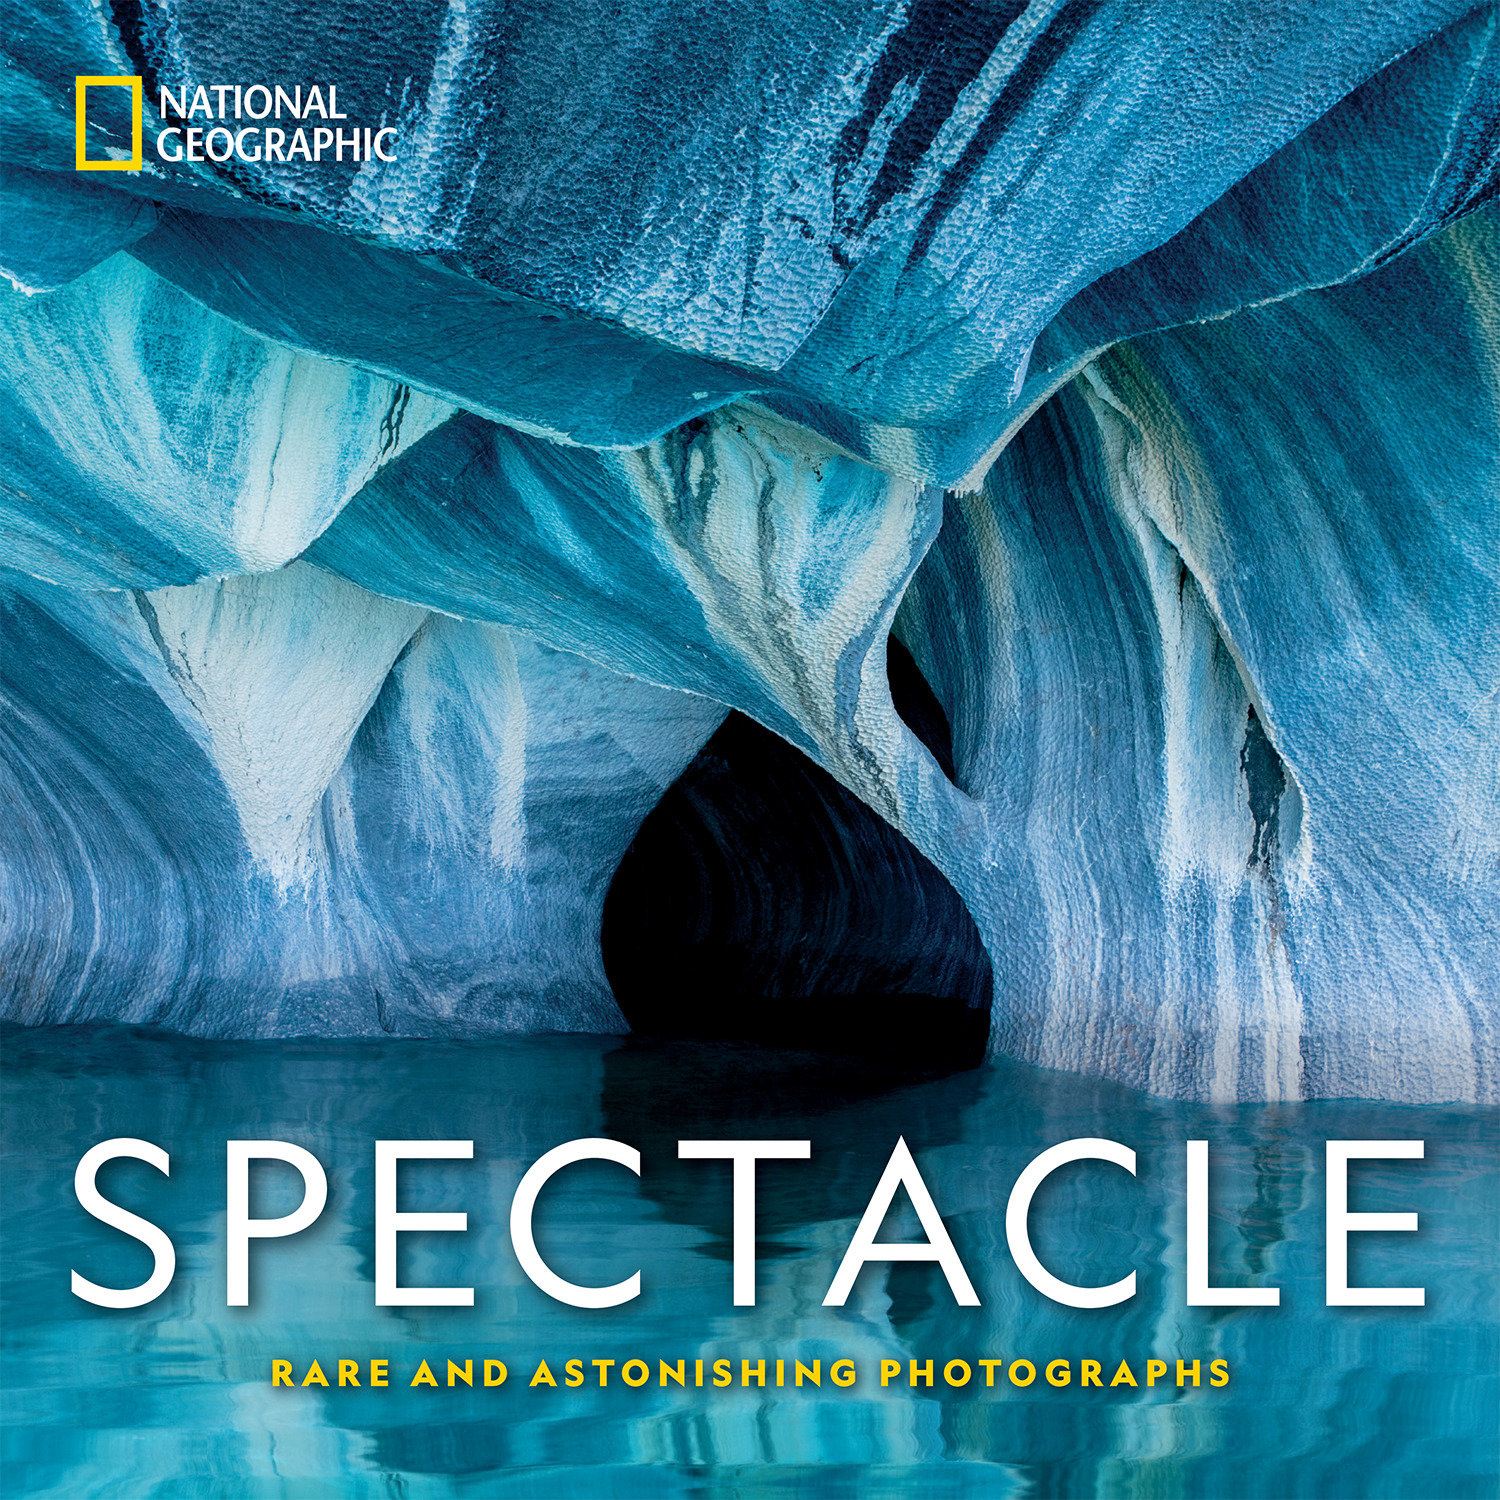 National Geographic Spectacle (Hardcover Book)